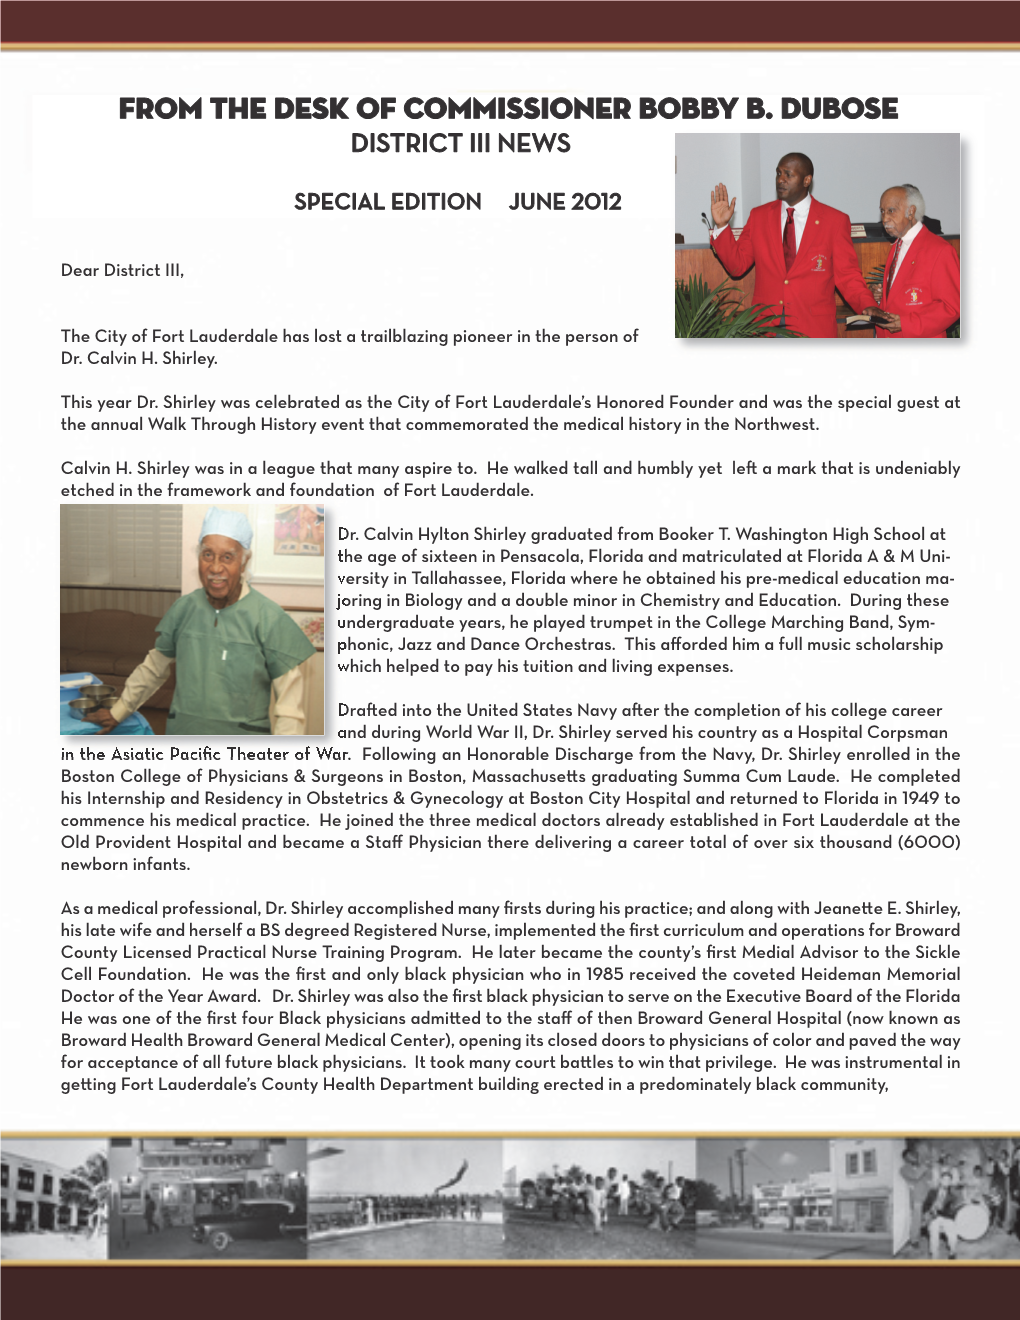 District III News Special Edition Layout 1